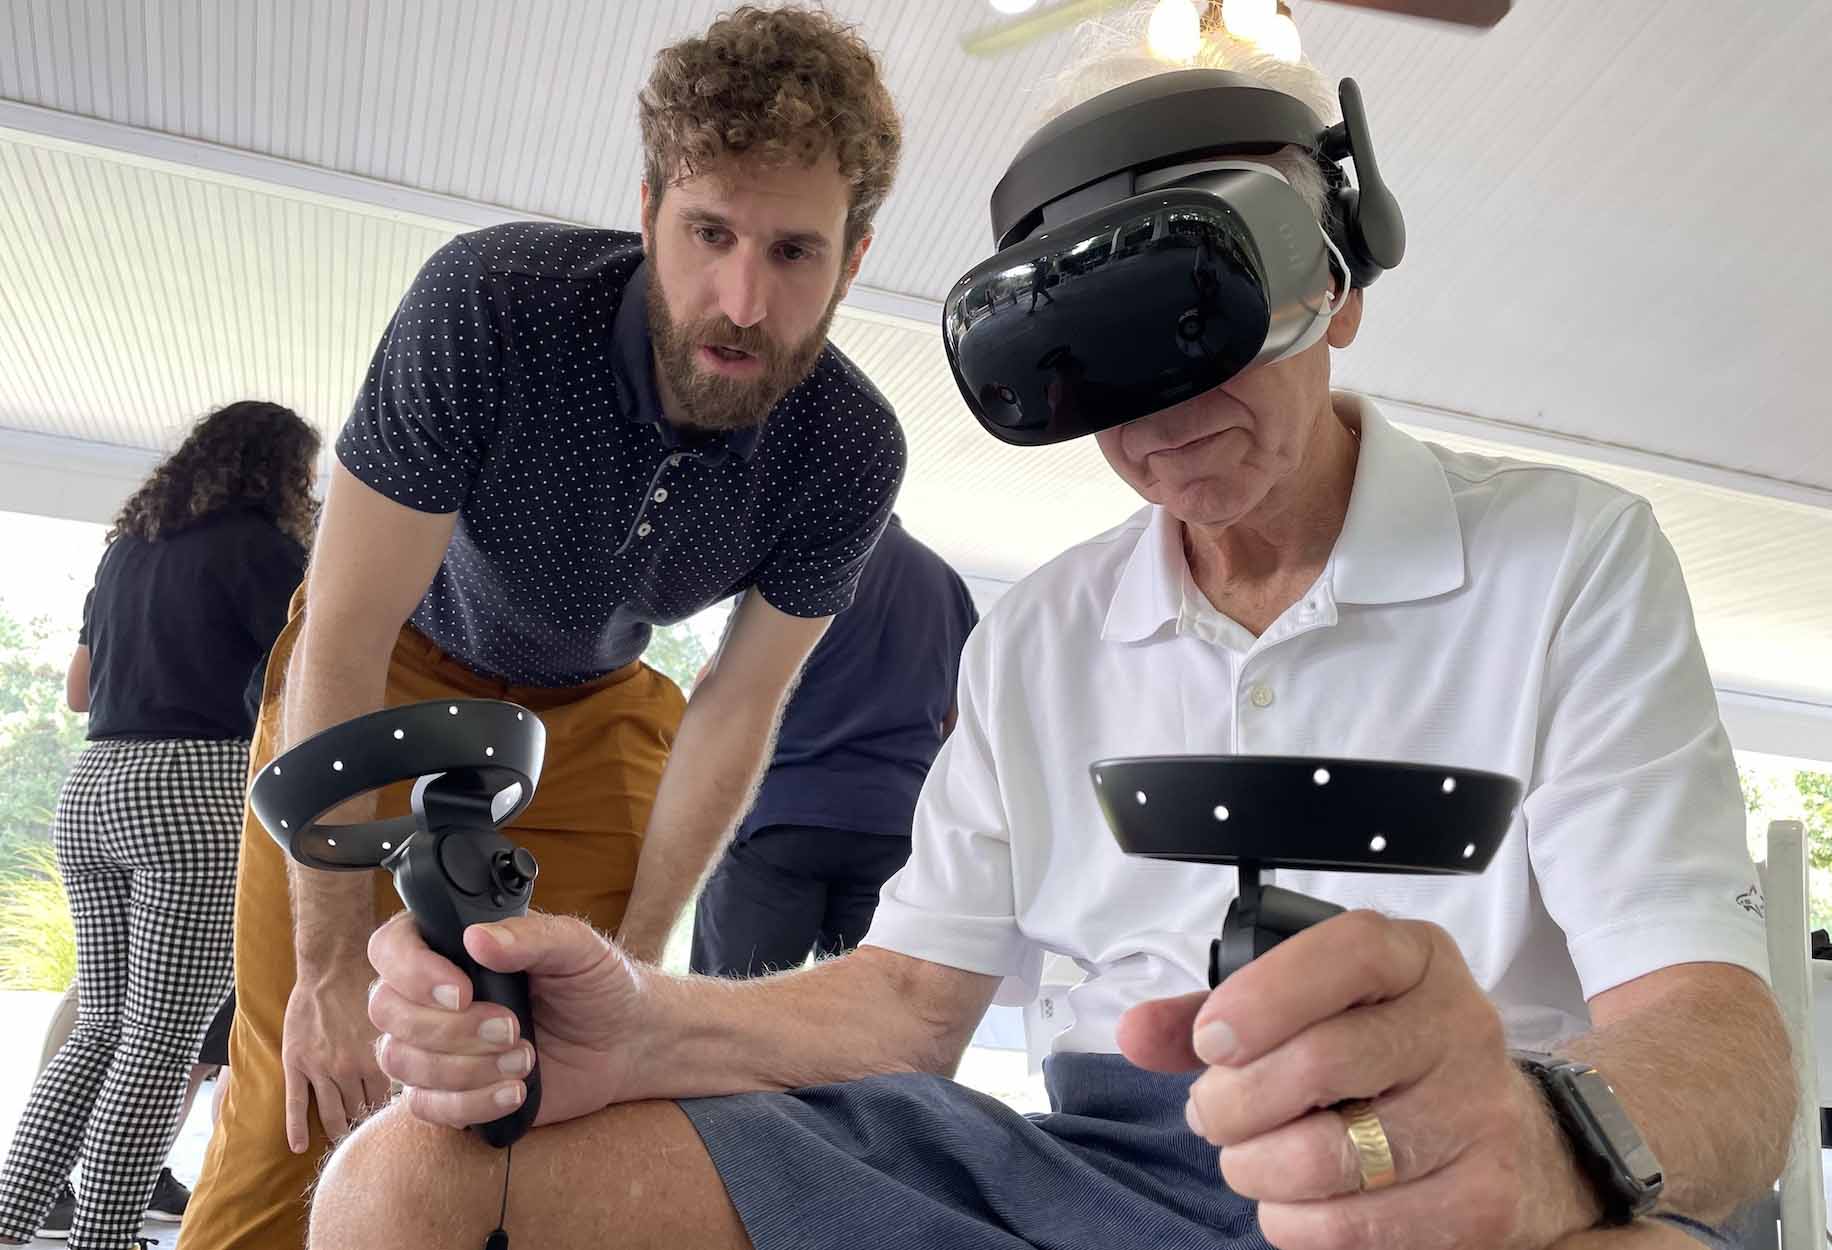 Parkinson's disease patient trying out a new virtual reality therapy